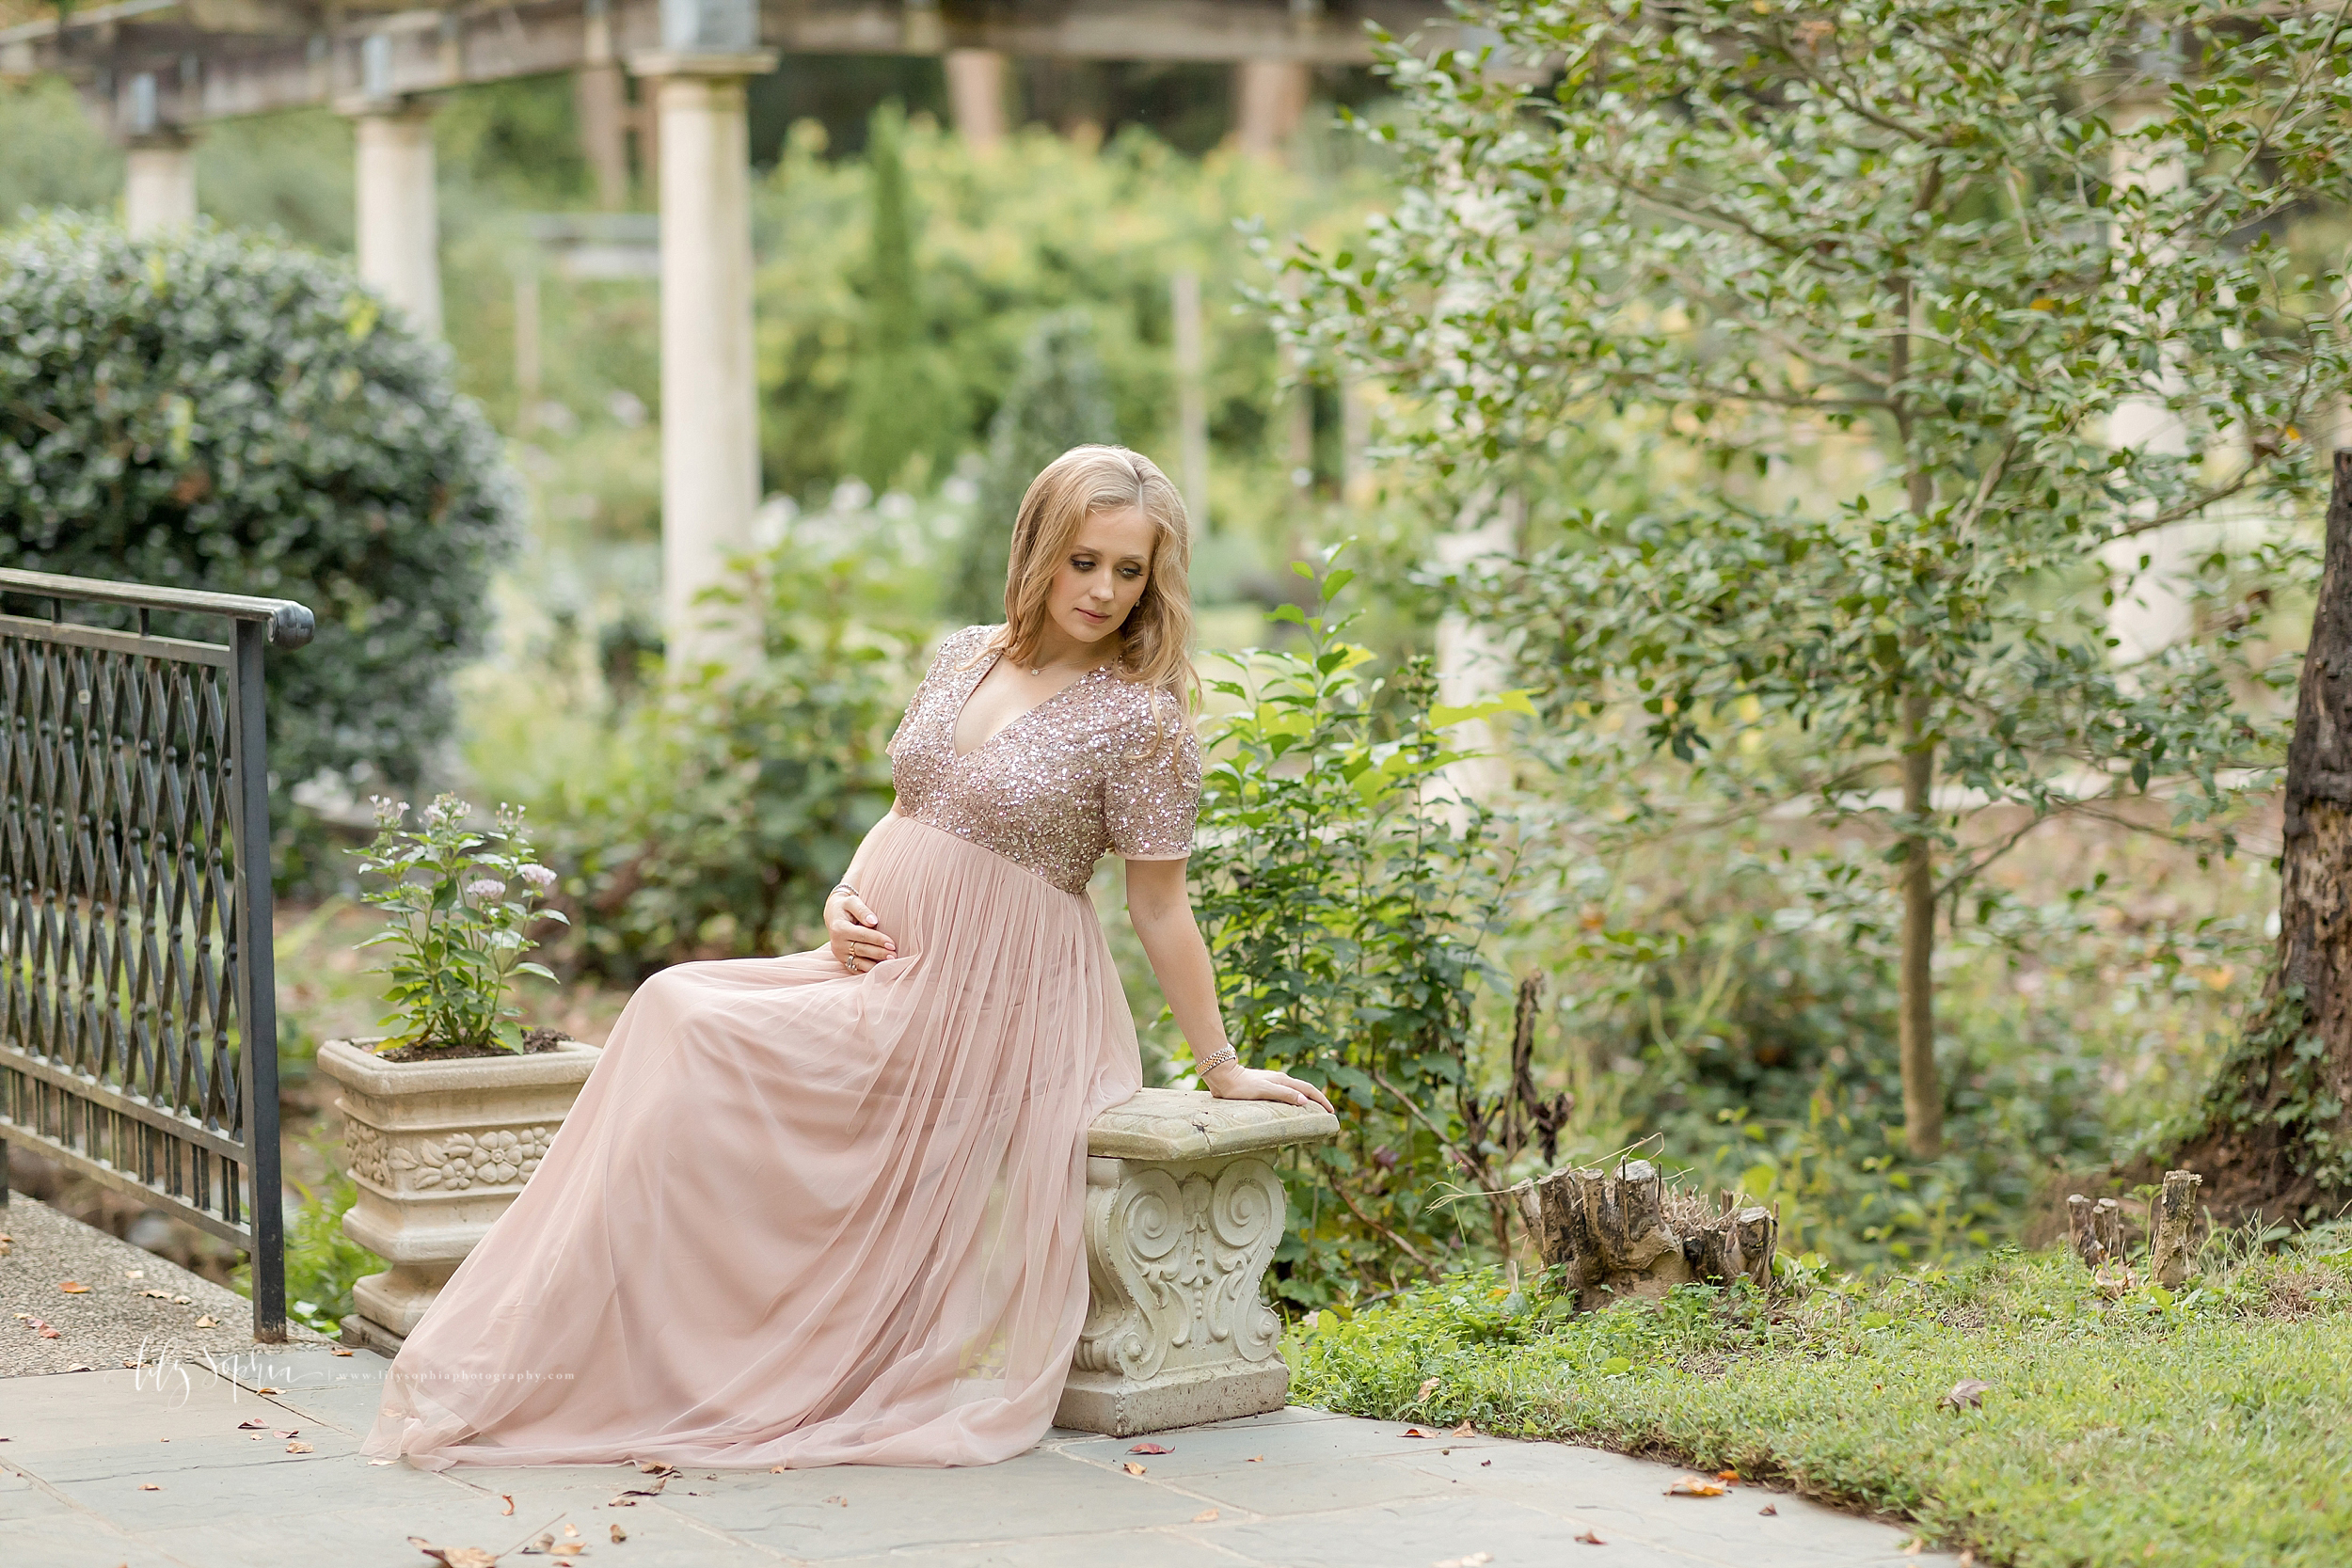 atlanta-buckhead-brookhaven-inman-decatur-lily-sophia-photography-maternity-pregnancy-photographer-portraits-studio-grant-park-intown-couple-russian-expecting-baby-boy-outdoors-gardens-sunset-fall_0659.jpg